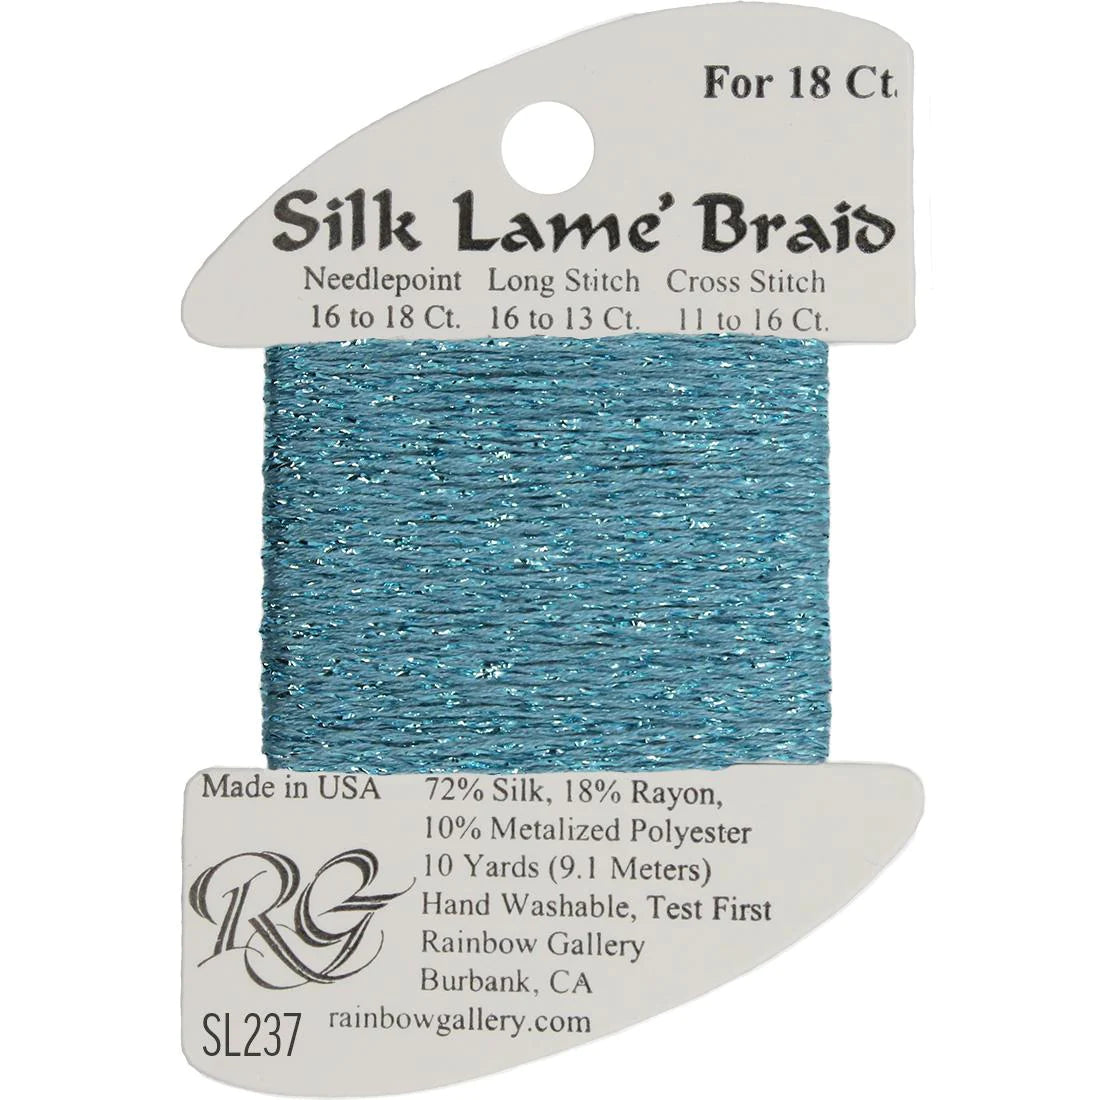 Silk Lame Braid 18 CT (SL200 and up)